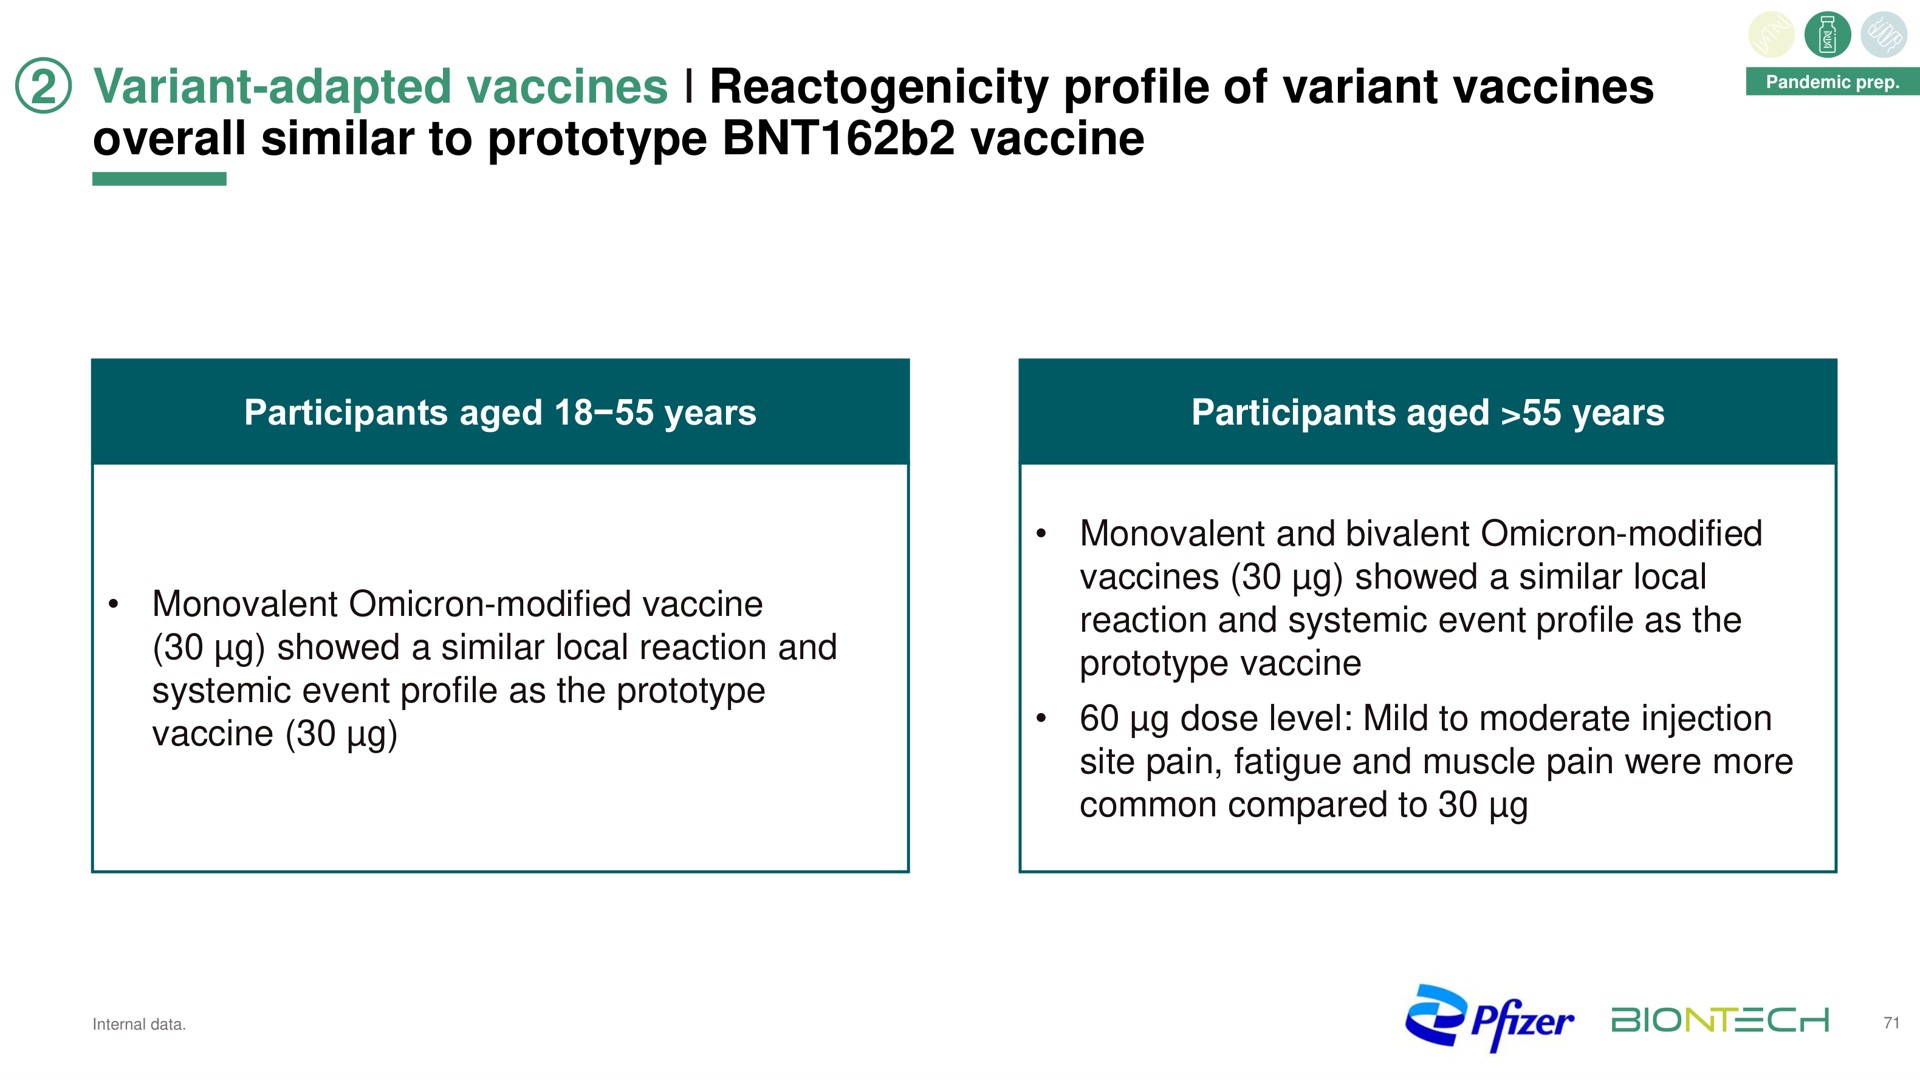 variant adapted vaccines profile of variant vaccines overall similar to prototype vaccine | BioNTech